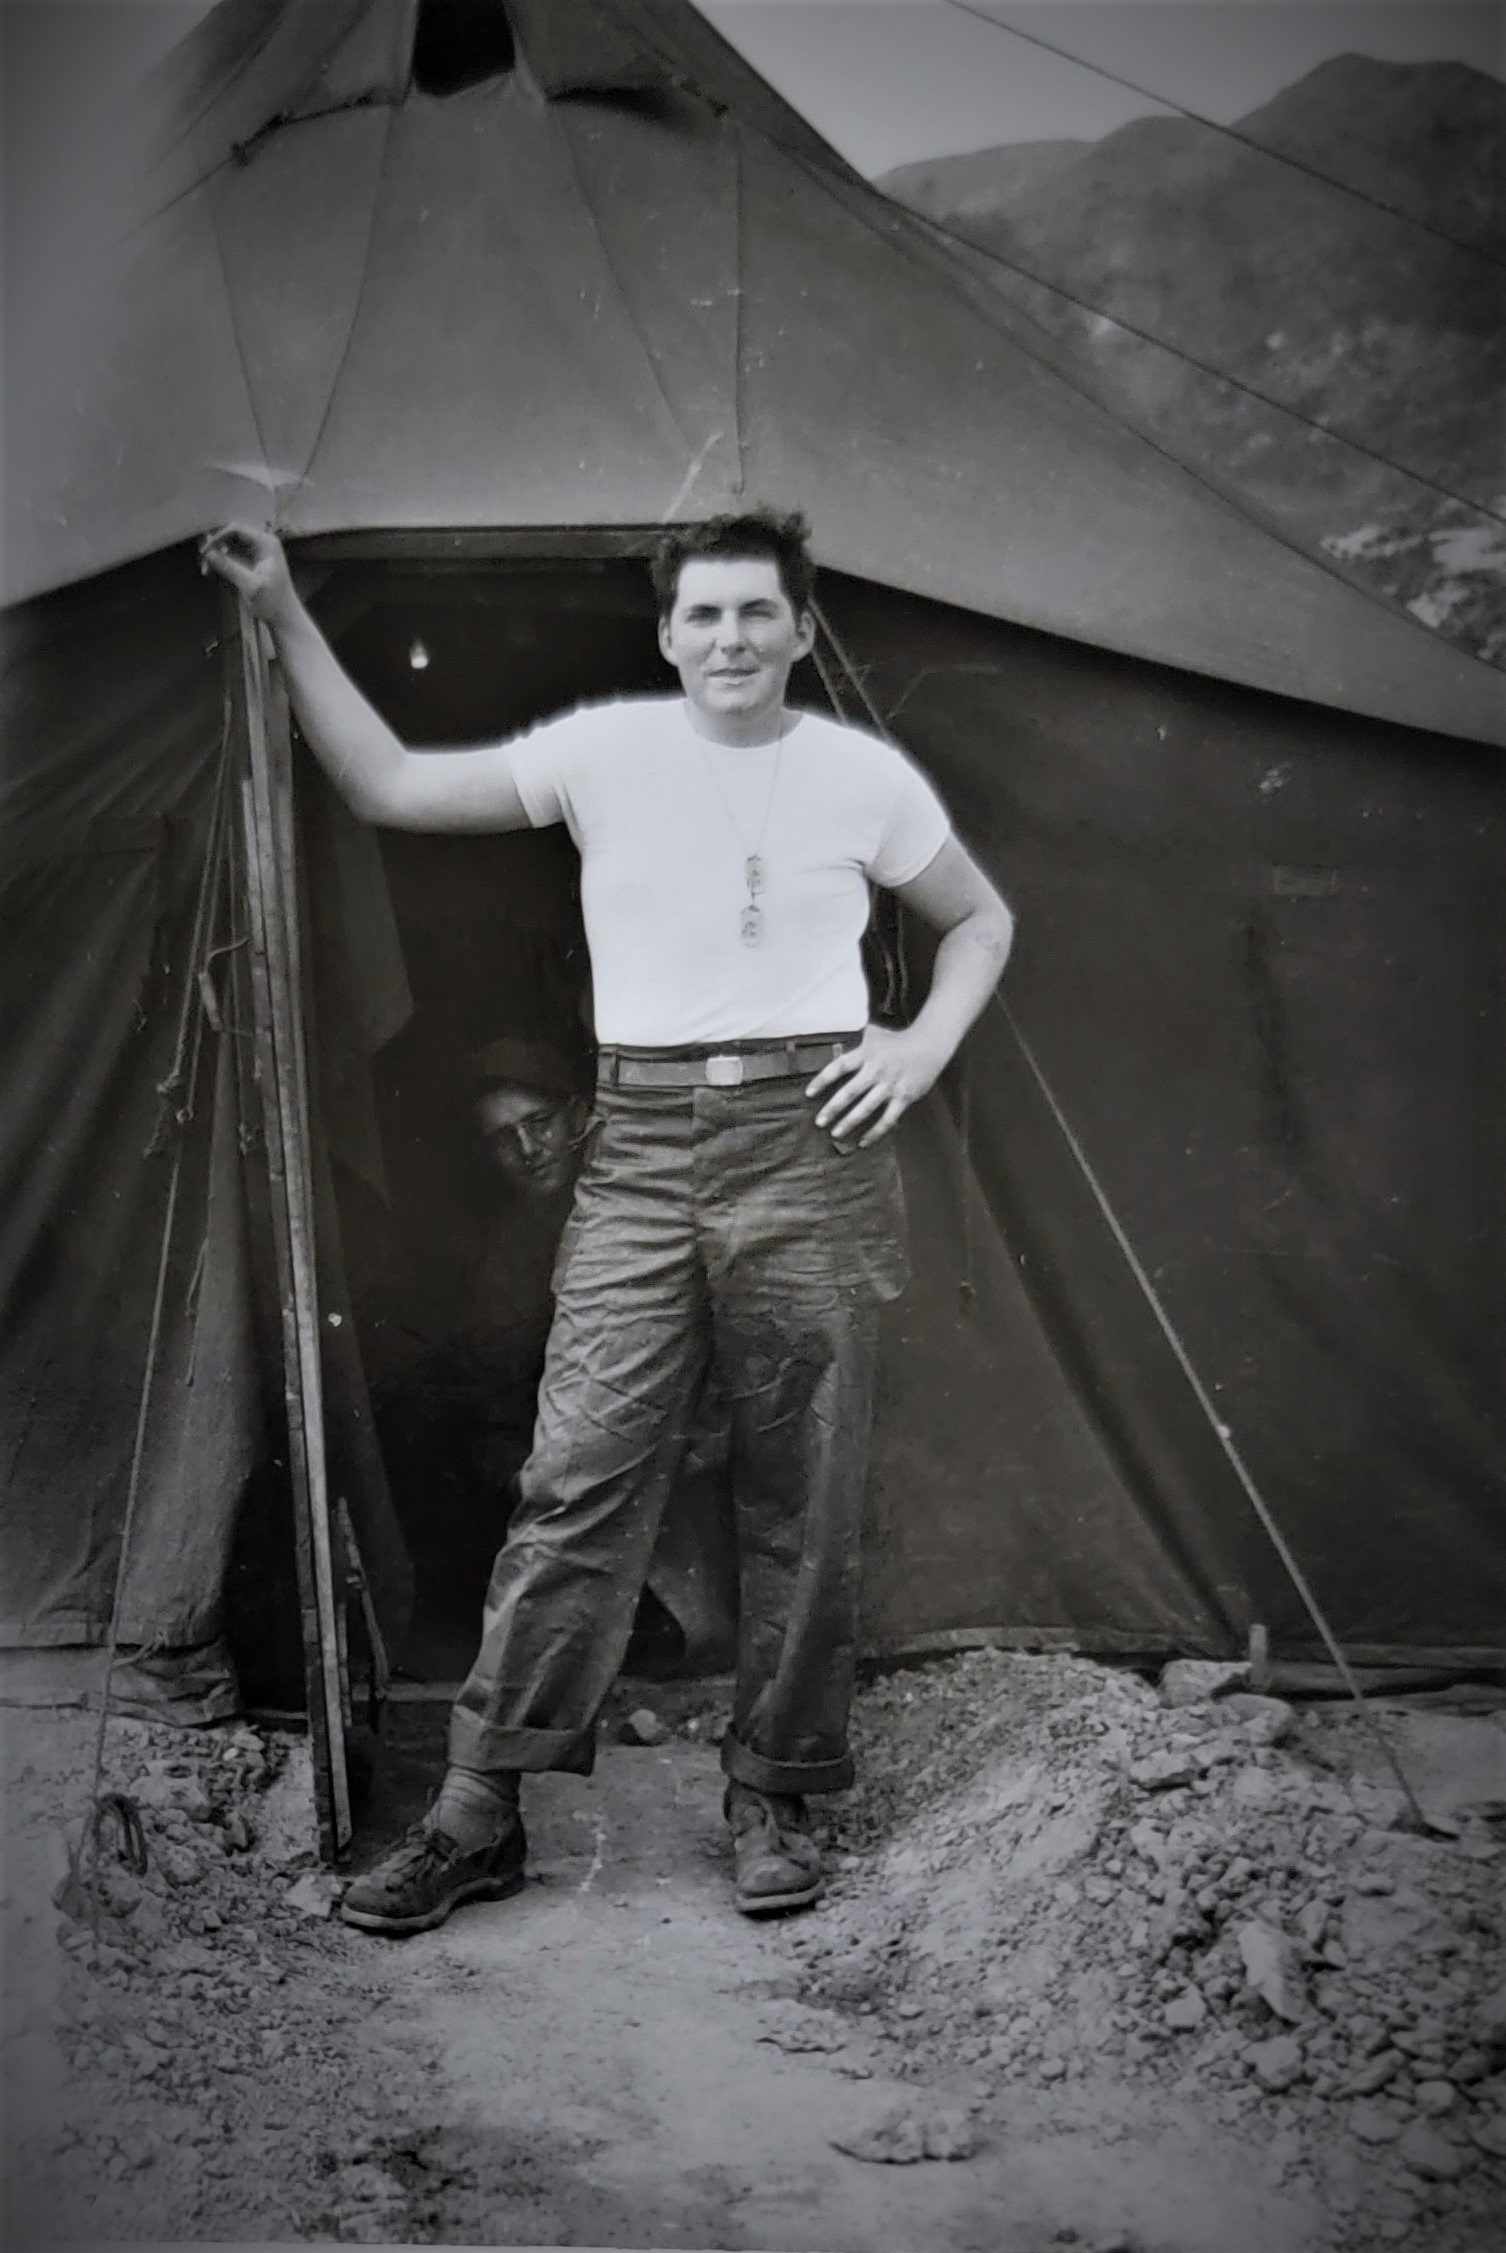 Robert Shaw as a young man, taking a break from soldiering